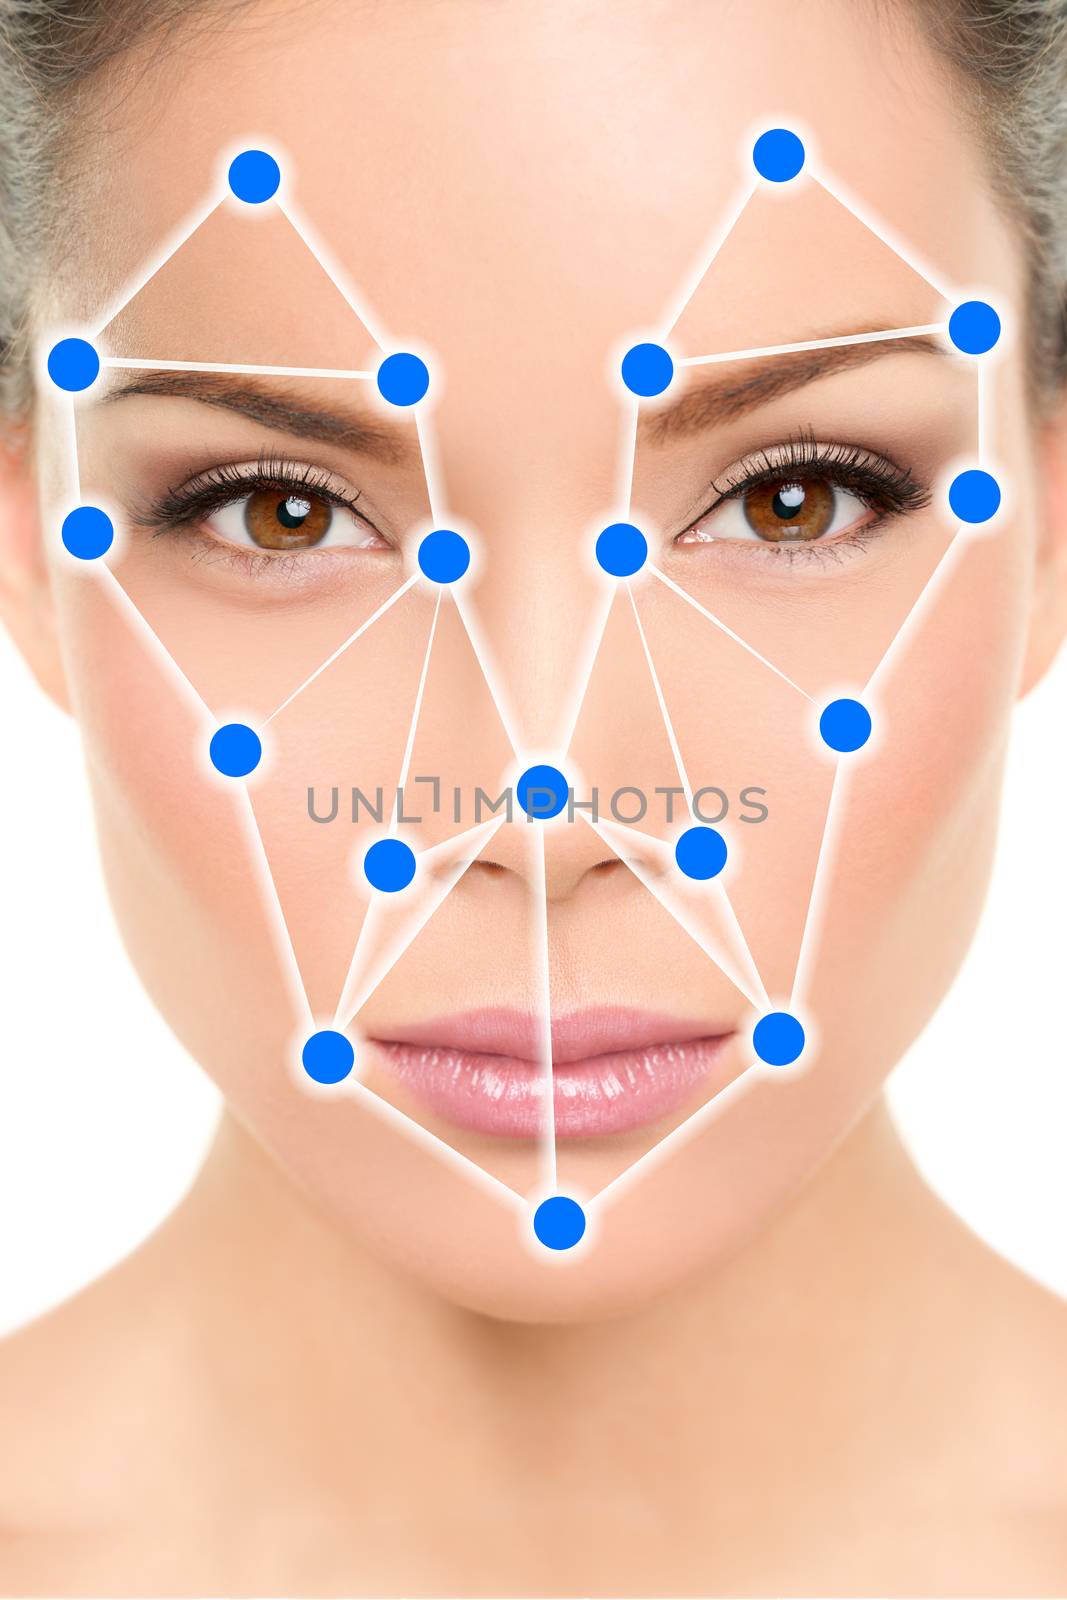 Biometric facial recognition software app technology for face identity verification identification concept. Asian woman portrait with scan illustration graphic design by Maridav